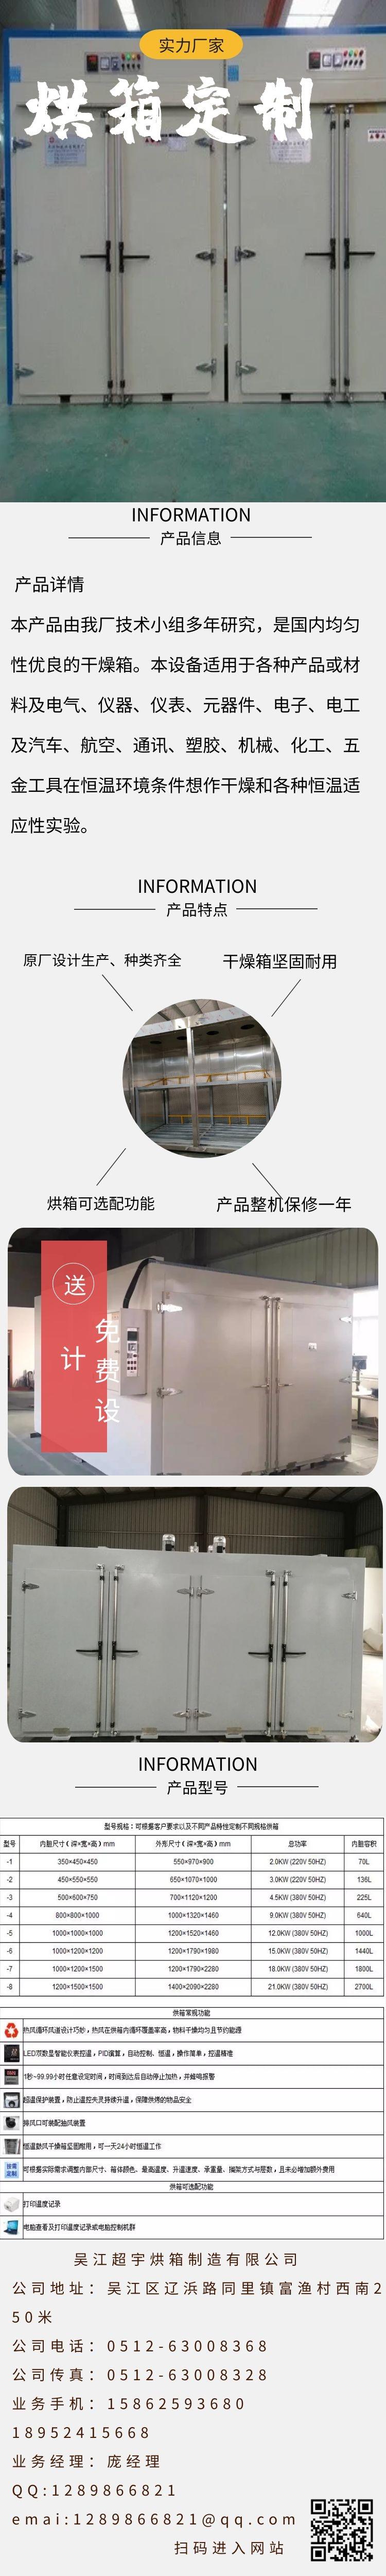 Large Oven, Electronic Products, Precision Oven, Industrial Multi functional New Model Industrial Oven